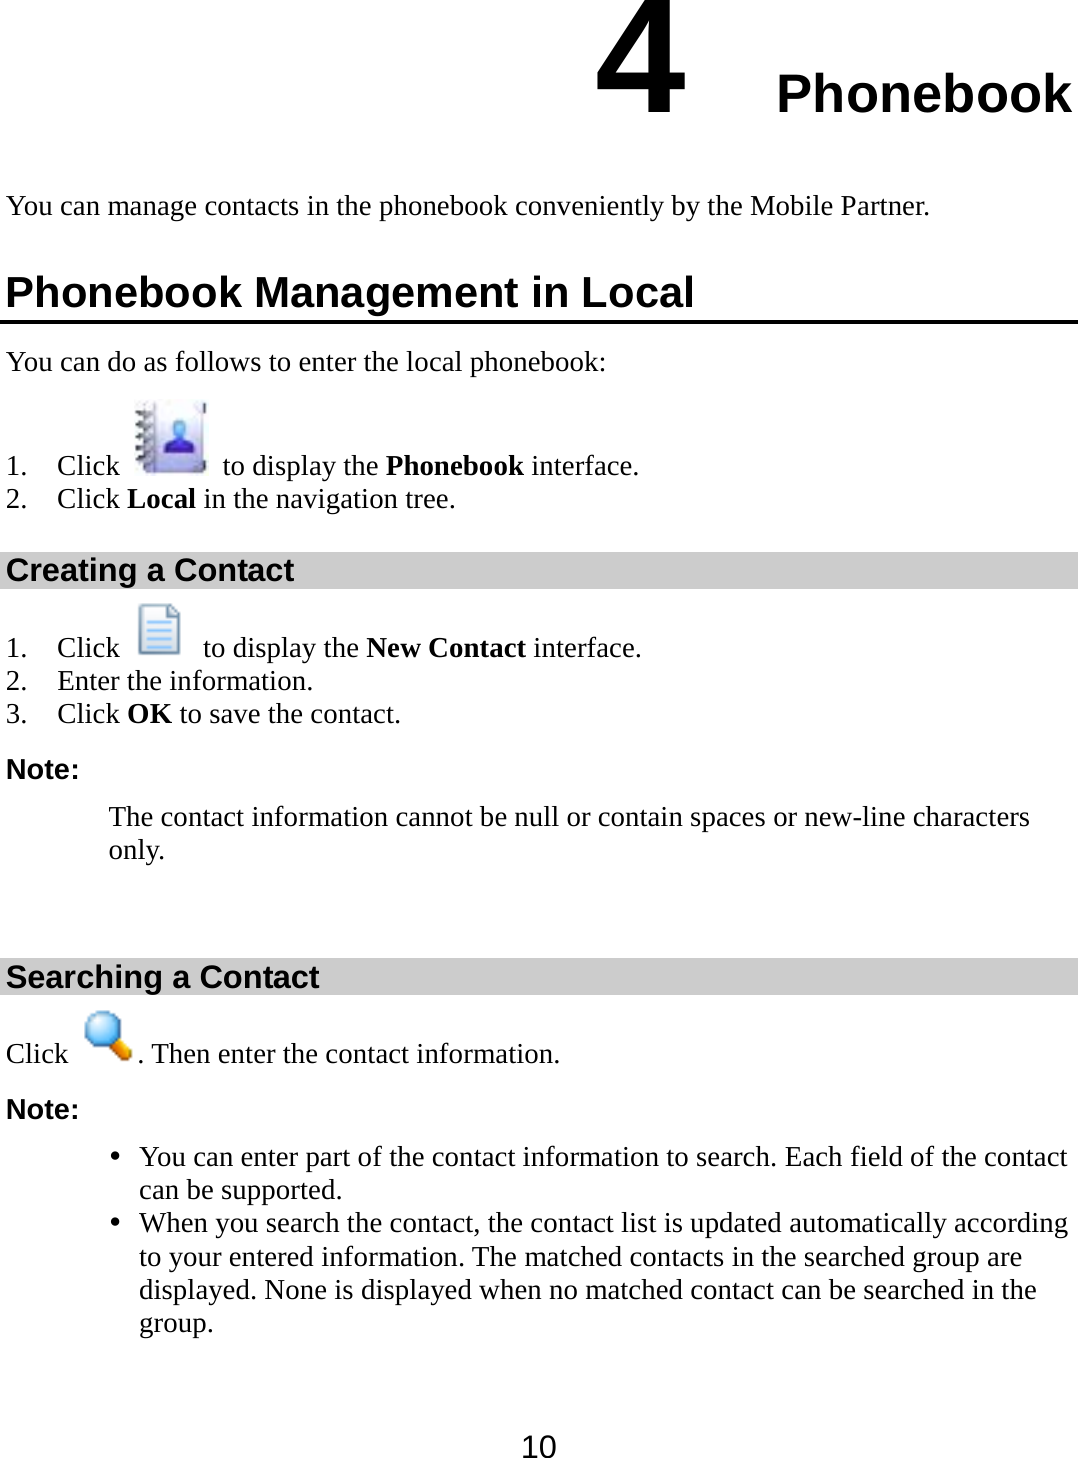  10 4  Phonebook You can manage contacts in the phonebook conveniently by the Mobile Partner.   Phonebook Management in Local You can do as follows to enter the local phonebook: 1. Click    to display the Phonebook interface. 2. Click Local in the navigation tree. Creating a Contact 1. Click    to display the New Contact interface. 2. Enter the information. 3. Click OK to save the contact. Note: The contact information cannot be null or contain spaces or new-line characters only.  Searching a Contact Click  . Then enter the contact information. Note:  You can enter part of the contact information to search. Each field of the contact can be supported.  When you search the contact, the contact list is updated automatically according to your entered information. The matched contacts in the searched group are displayed. None is displayed when no matched contact can be searched in the group.  